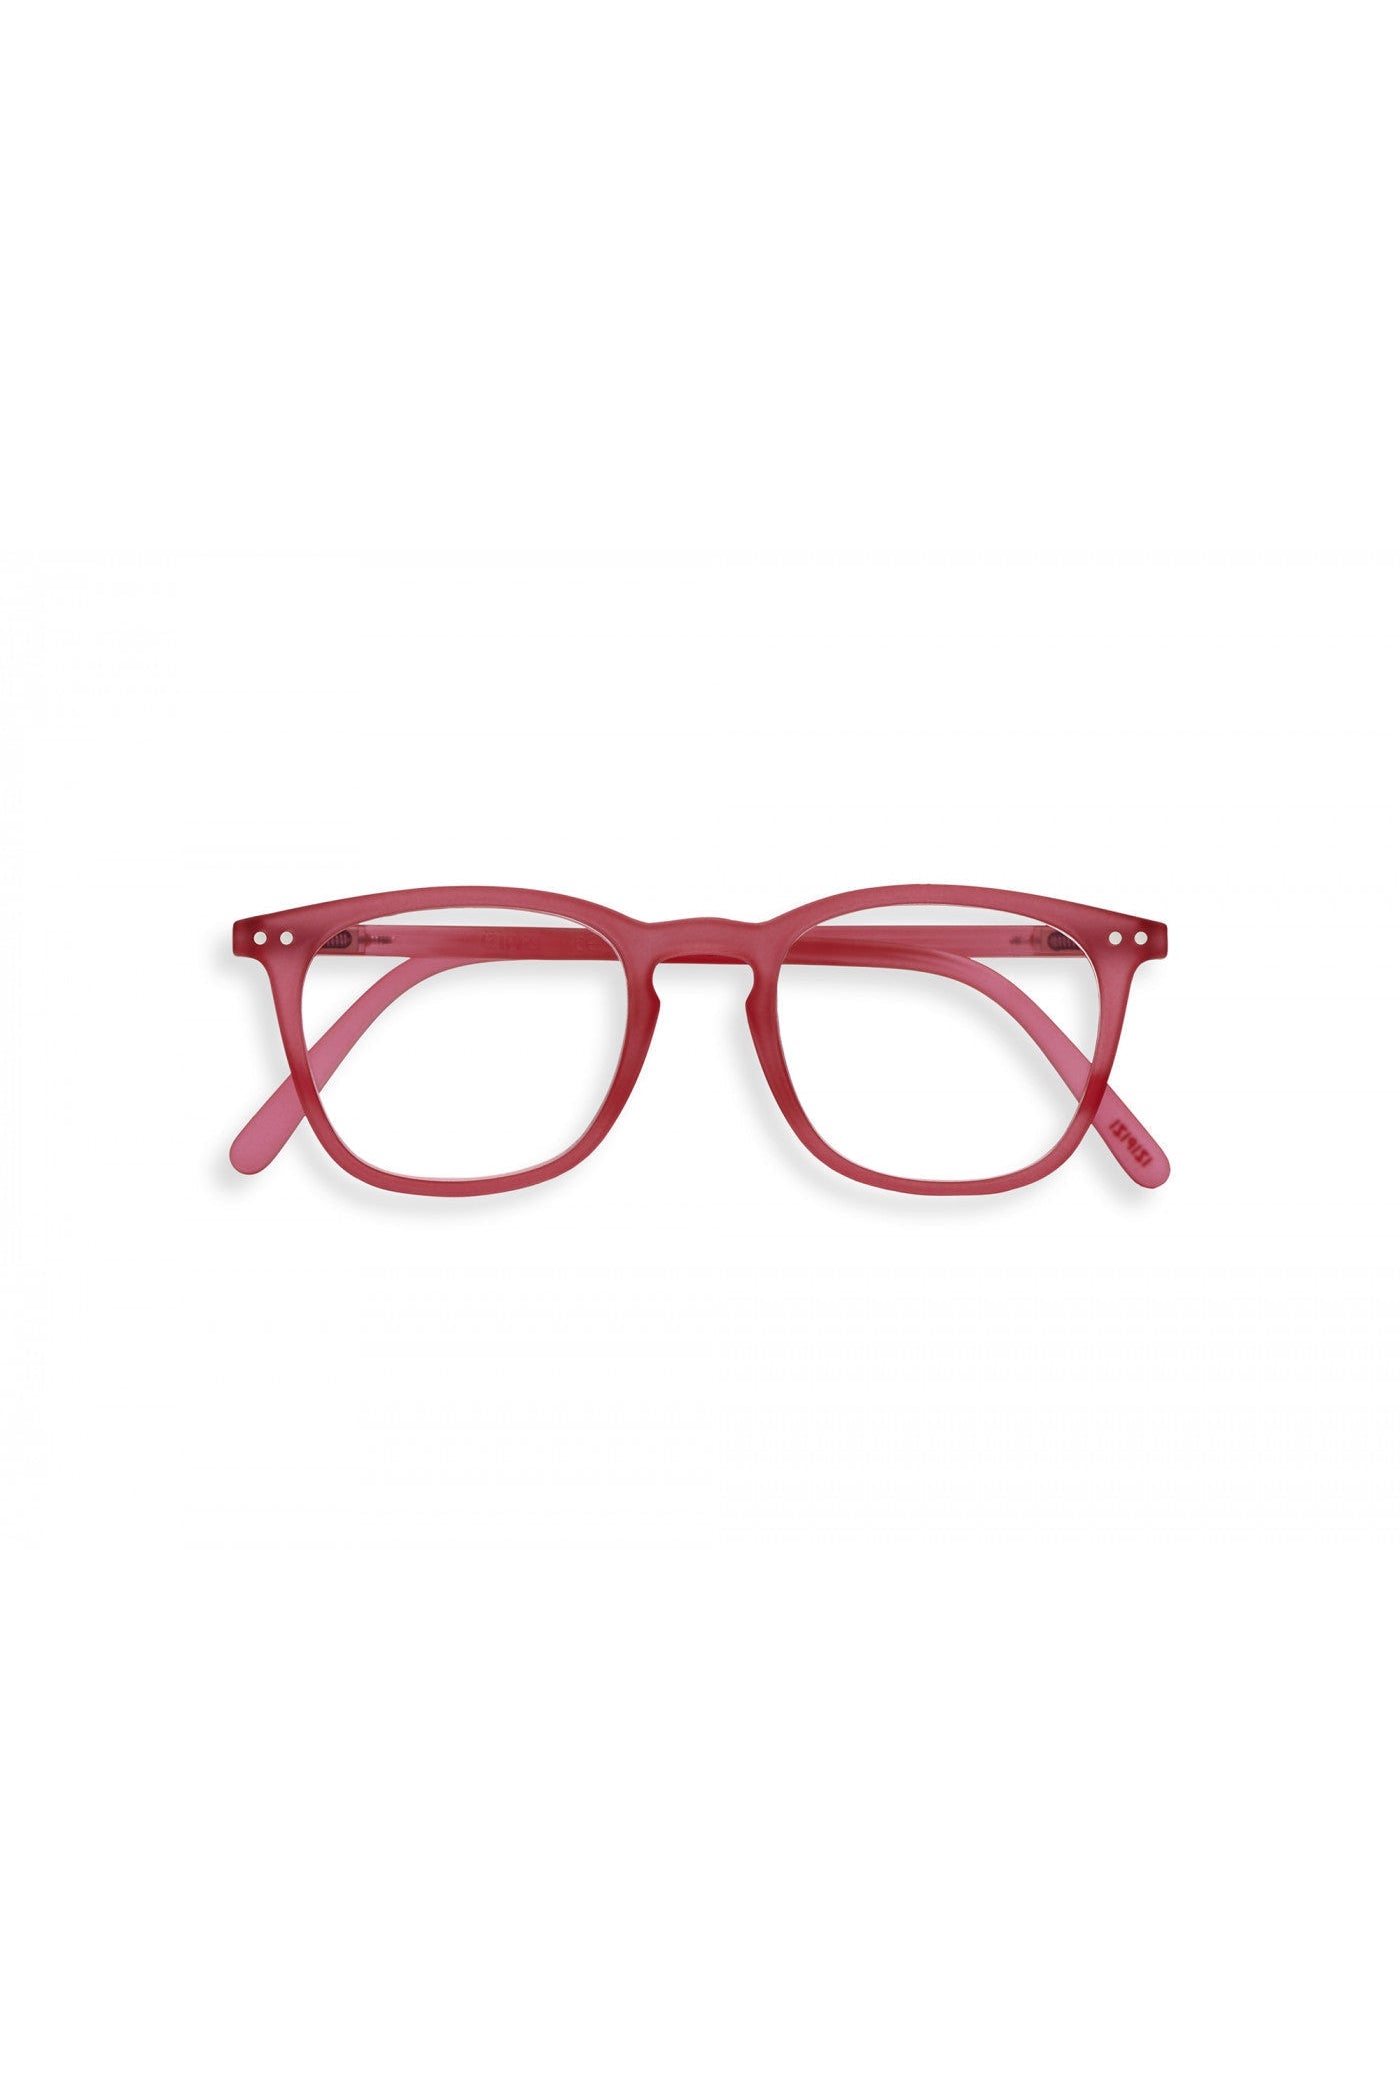 Izipizi Reading Glasses #E-Accessories-Ohh! By Gum - Shop Sustainable